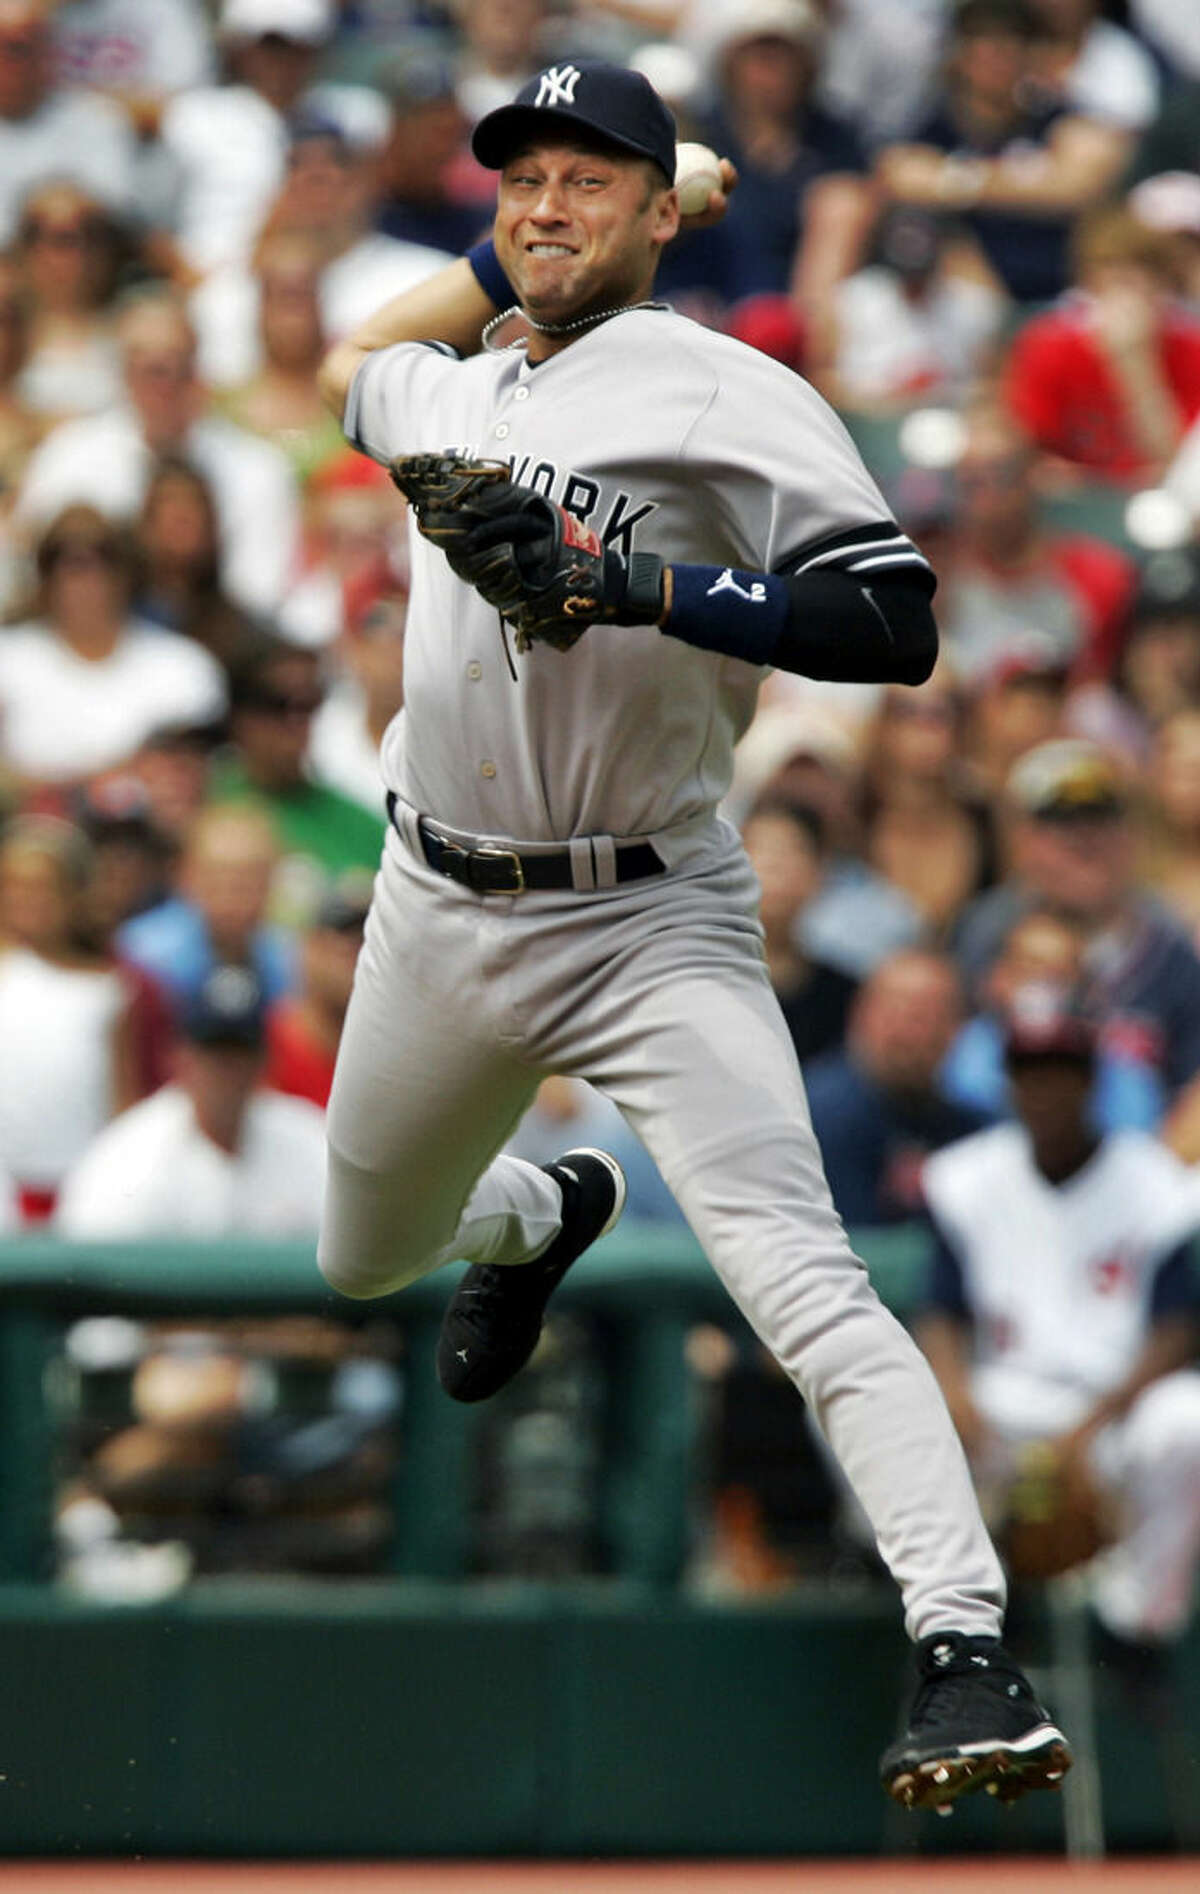 FILE - In this Aug. 12, 2007, file photo, New York Yankees shortstop Derek Jeter makes a leaping throw to get Cleveland Indians' Casey Blake at first base in the first inning of a baseball game in Cleveland. A five-time World Series champion and sixth on the career hits list, Jeter, now 40, is set to retire after this season after spending two decades as the shortstop for the Yankees. (AP Photo/Mark Duncan, File)